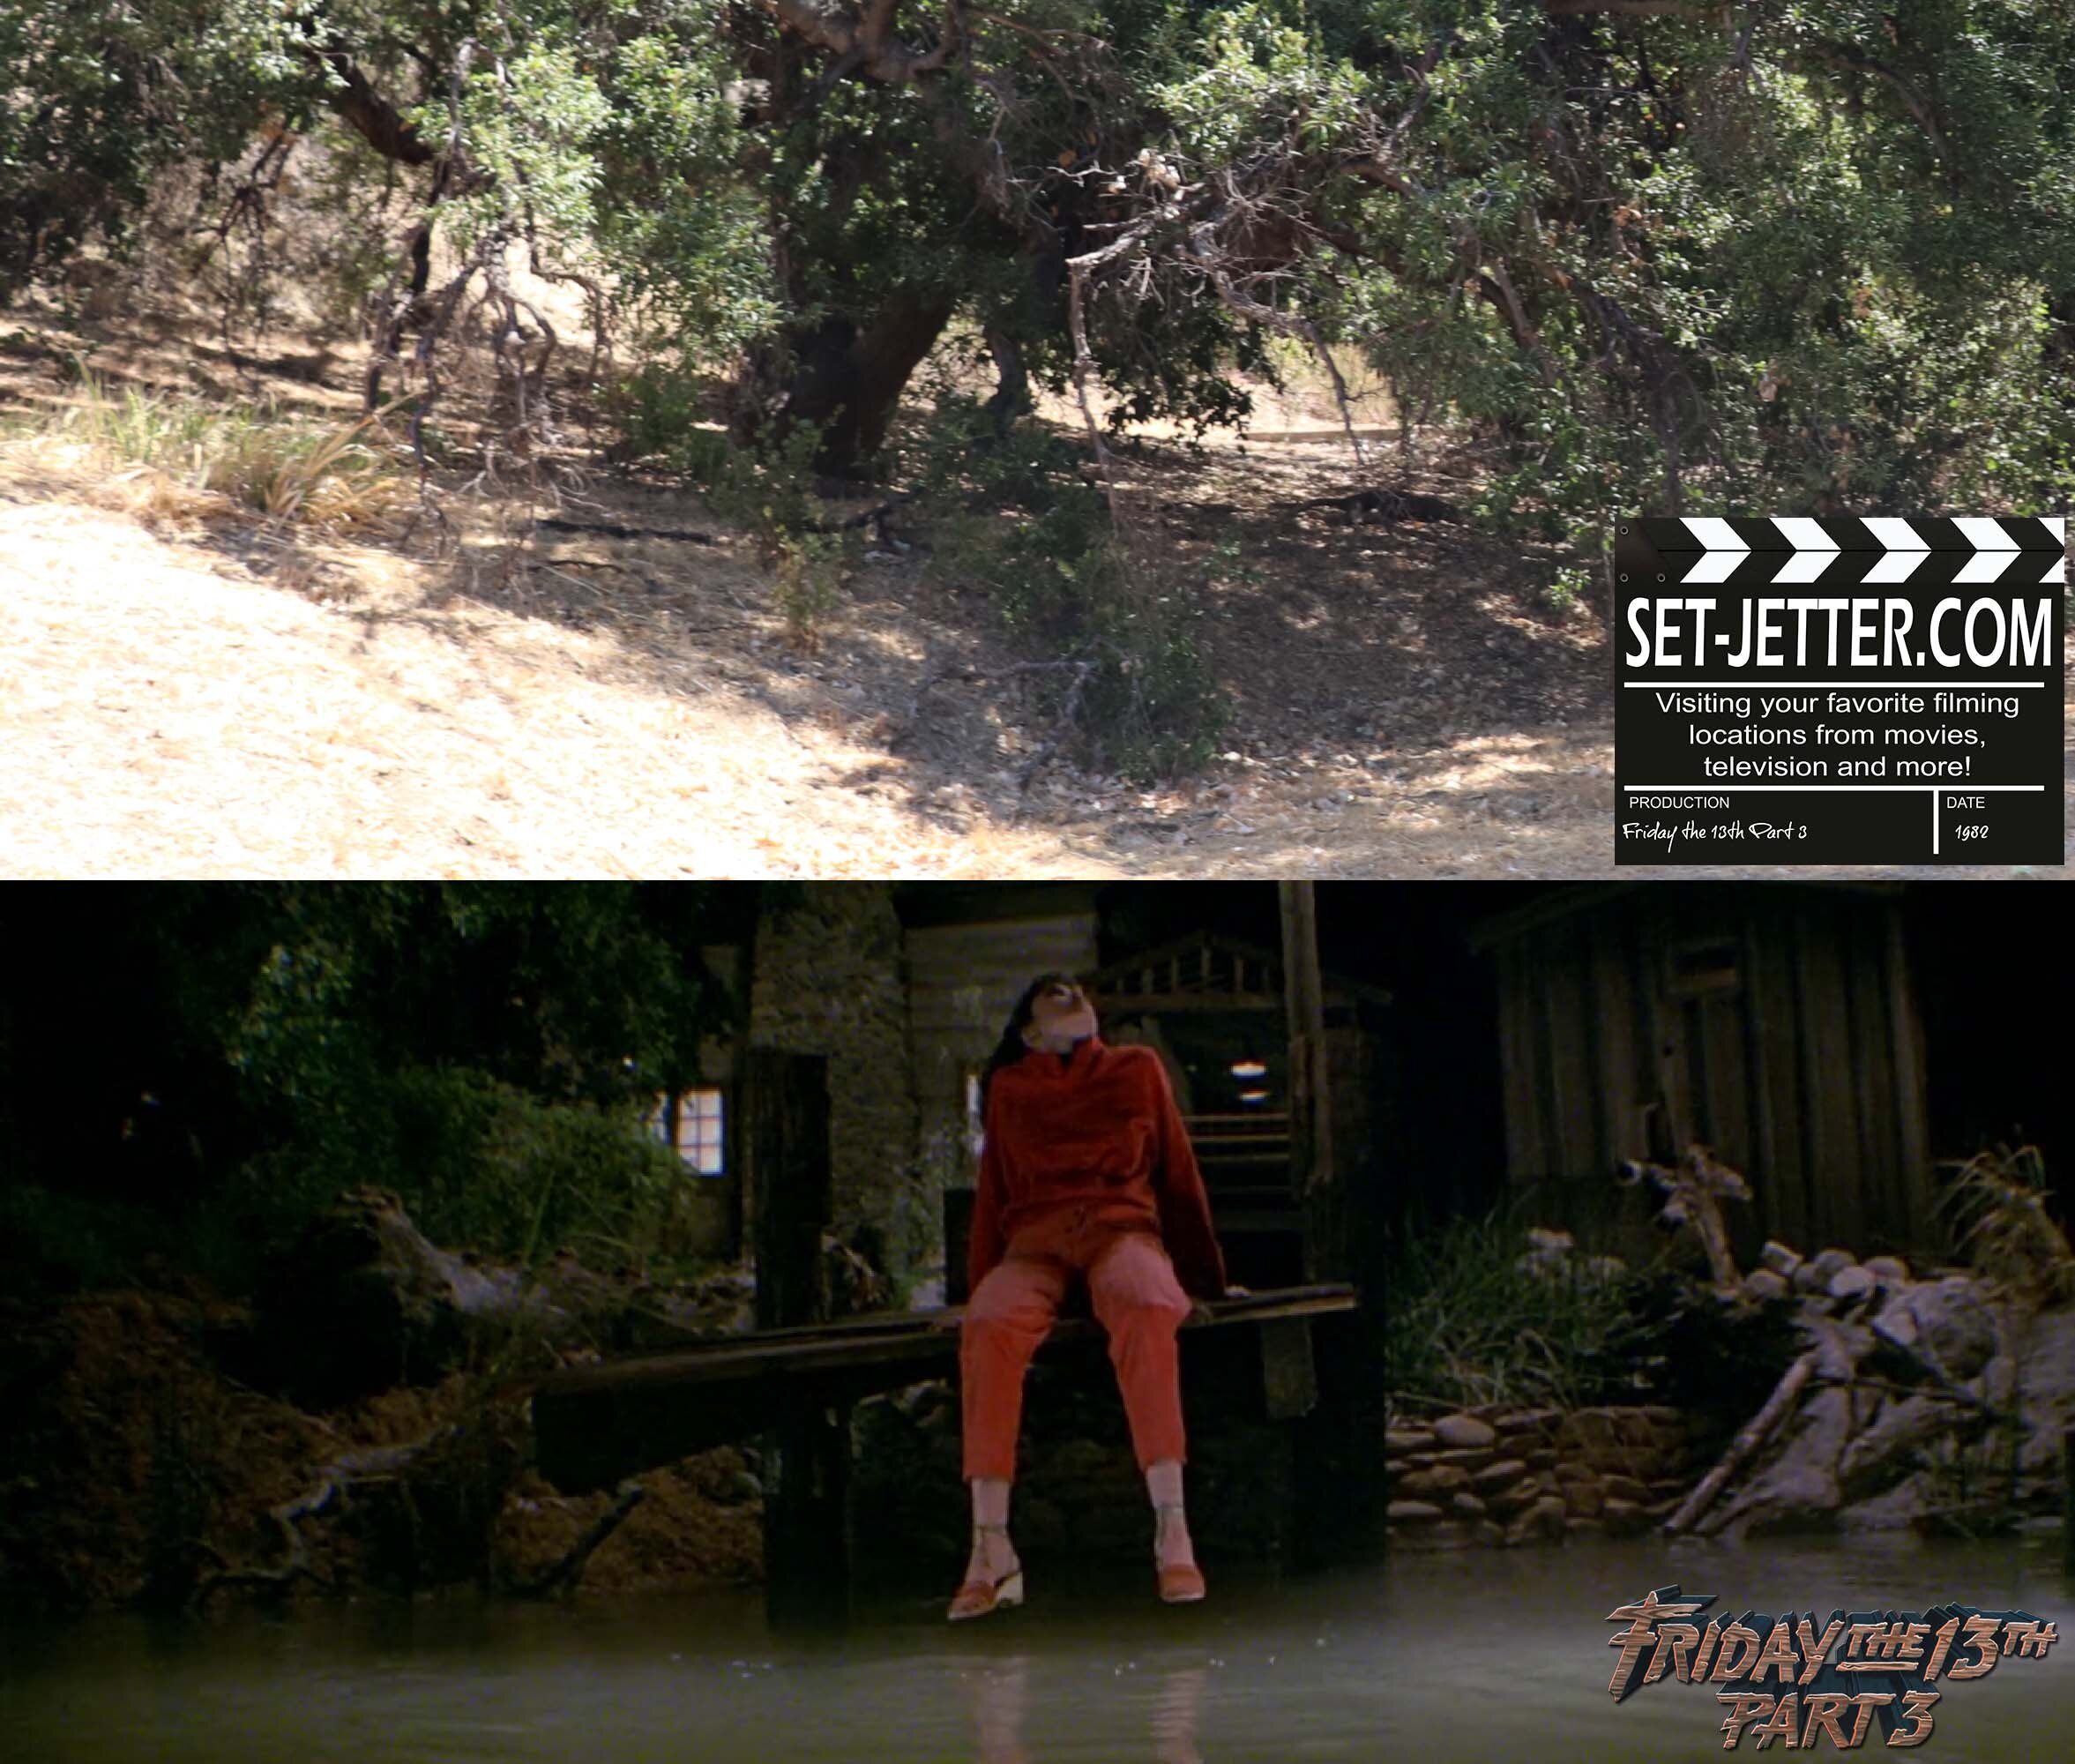 Friday the 13th Part 3 in 3-D (78).jpg